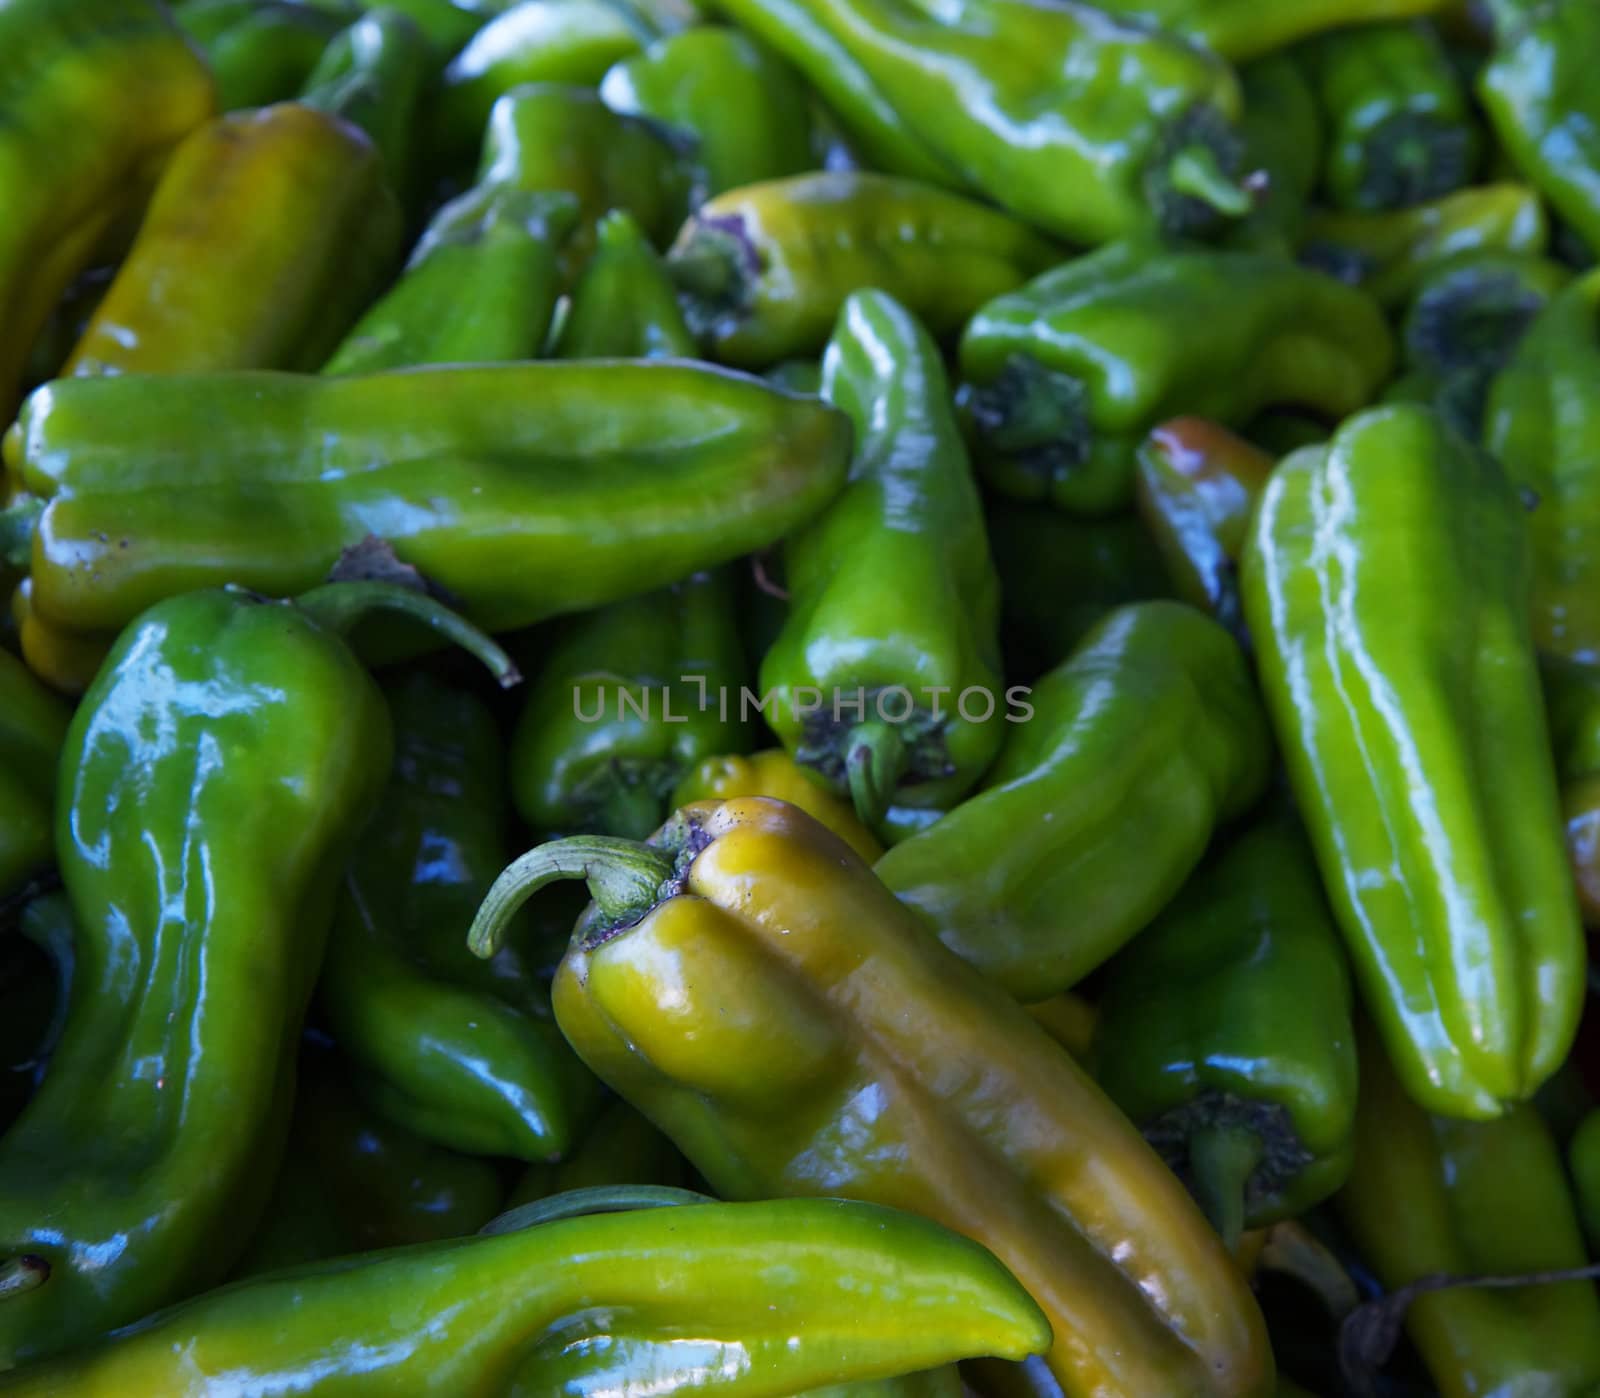 Pile of jalapeno green and yellow peppers at the farmers market